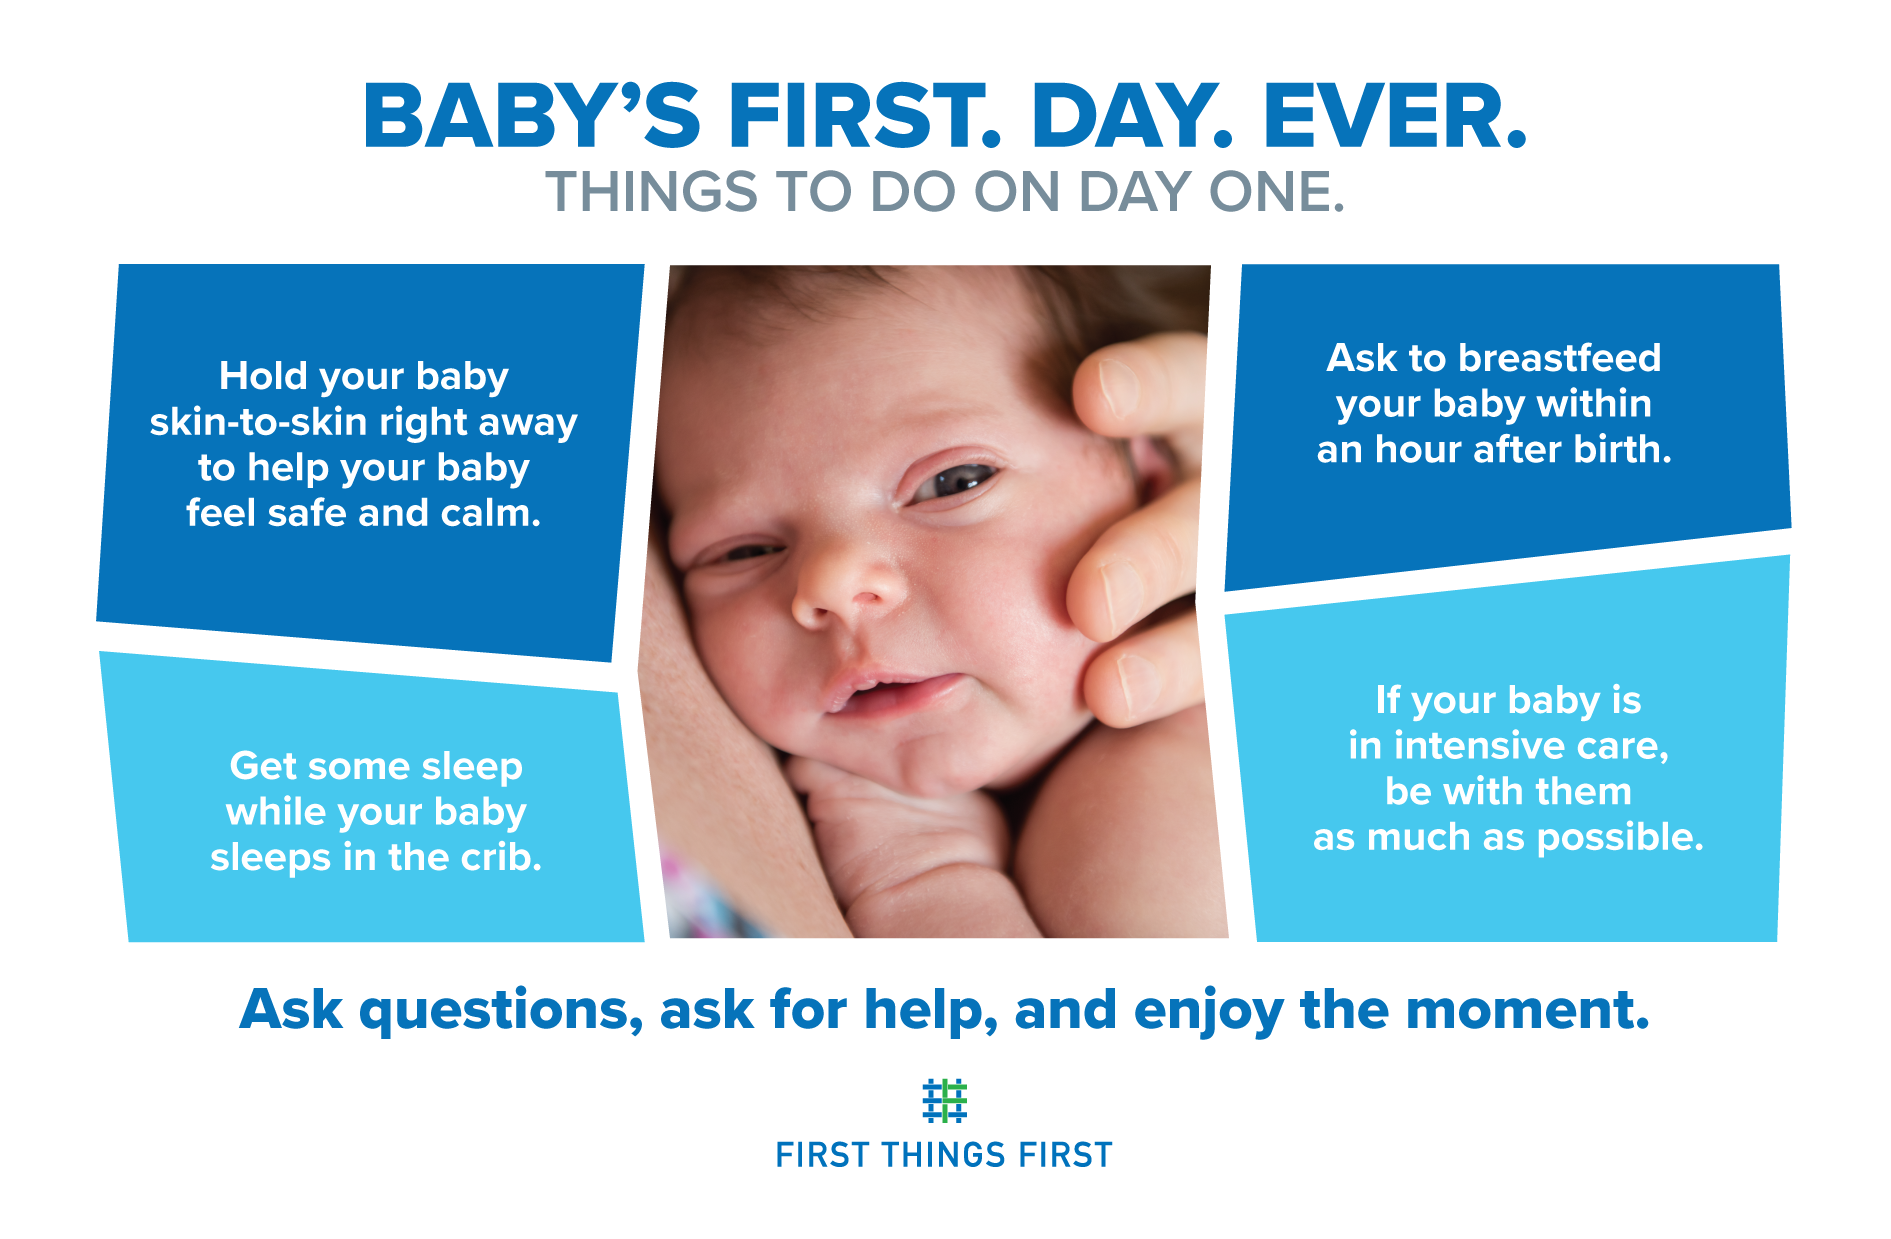 Things to do on baby's first day